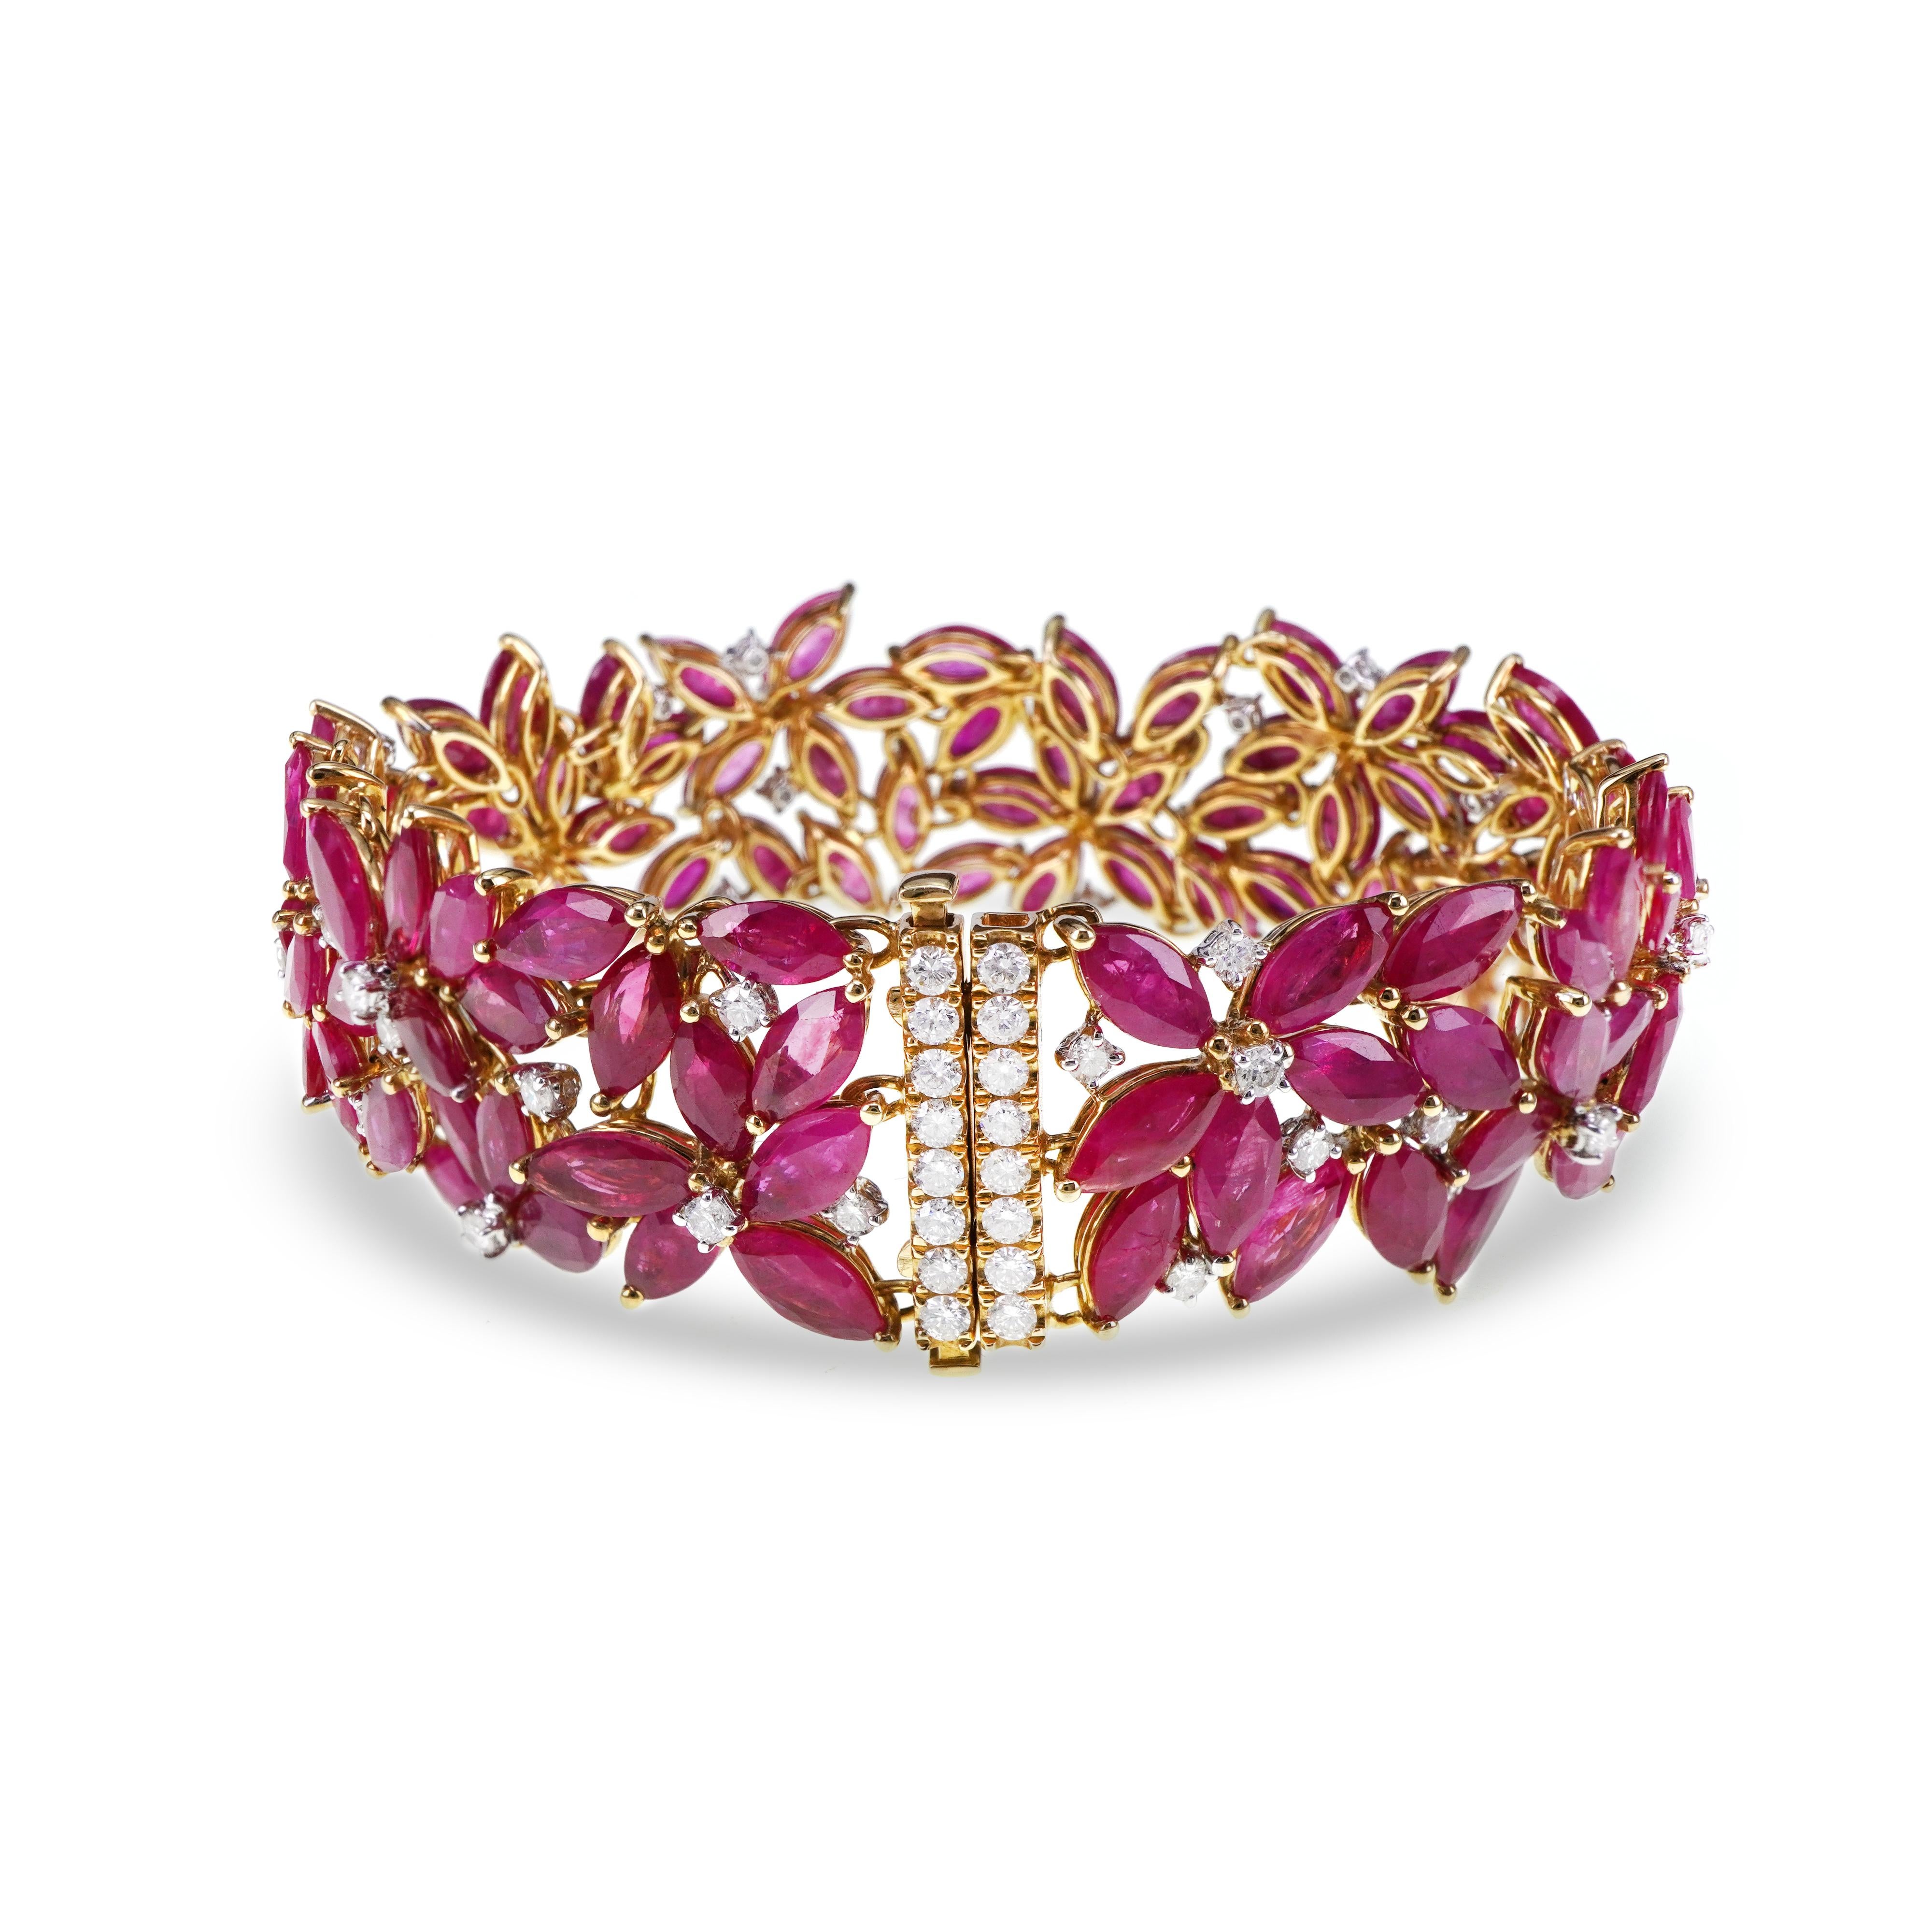 Contemporary 43.06 Carat Vivid Red Burma Ruby and 1.44 Carat White Diamond Classical Bracelet For Sale